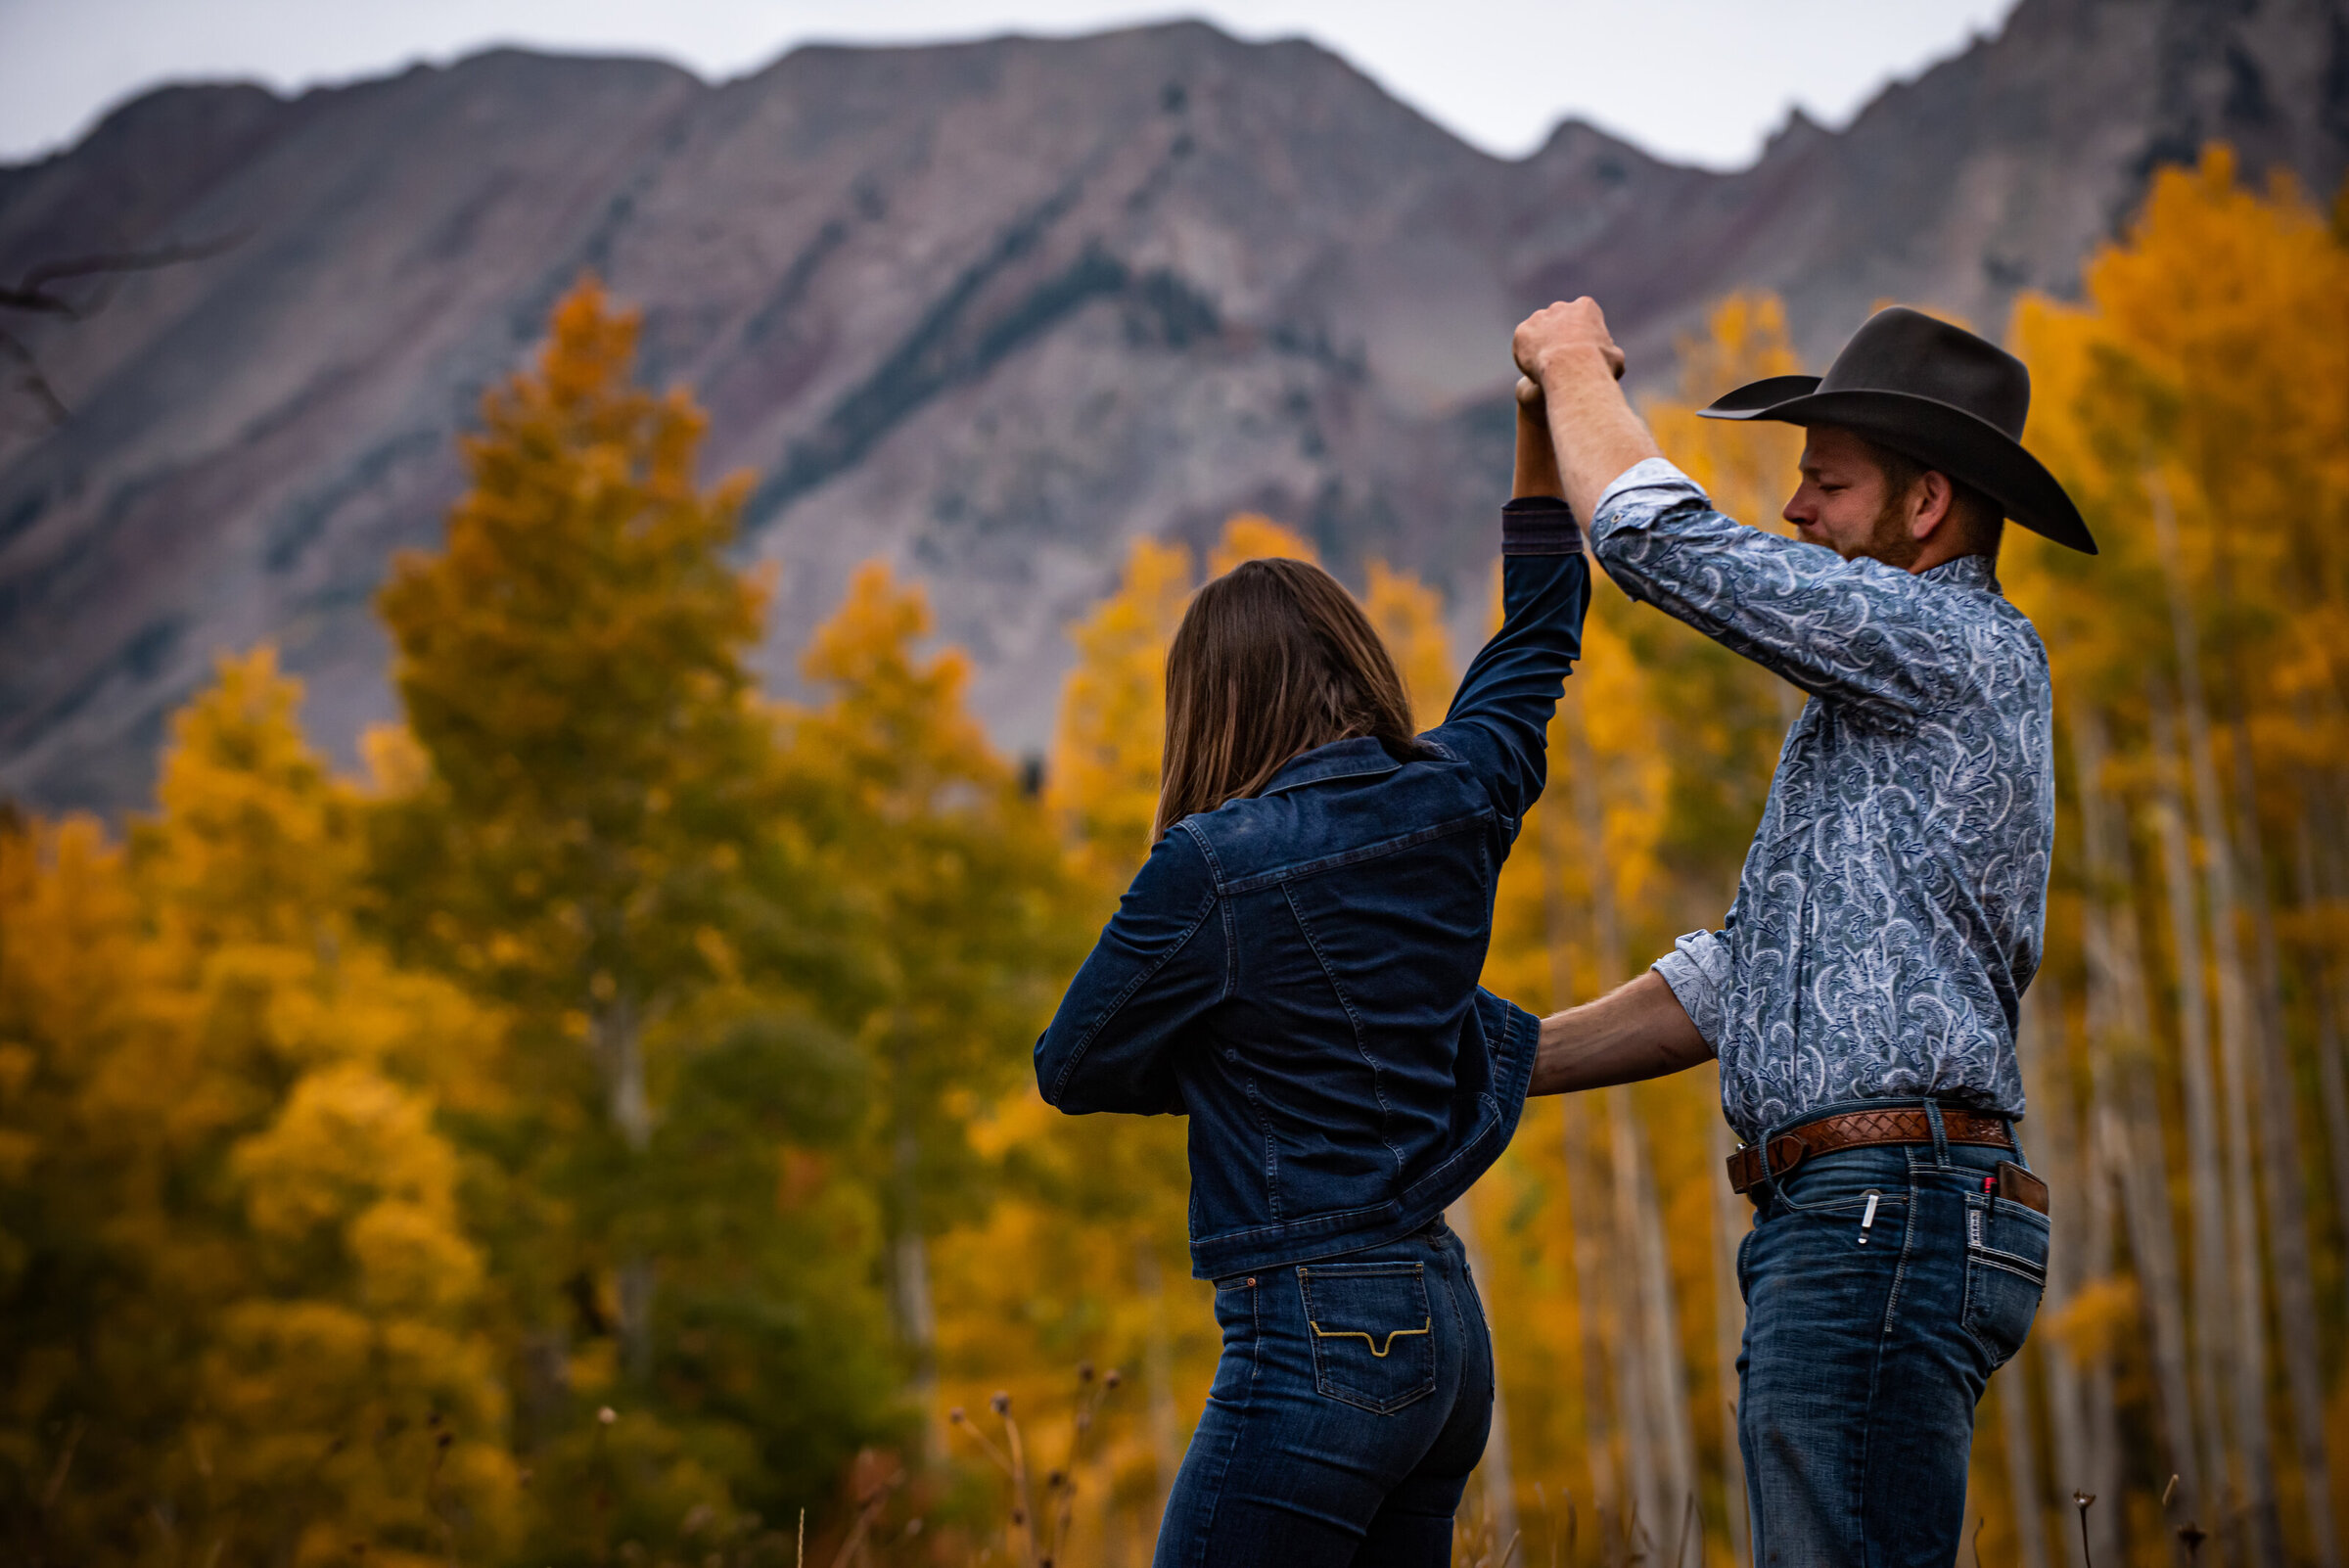 Cowboy dances with fiance in aspen grove in autumn